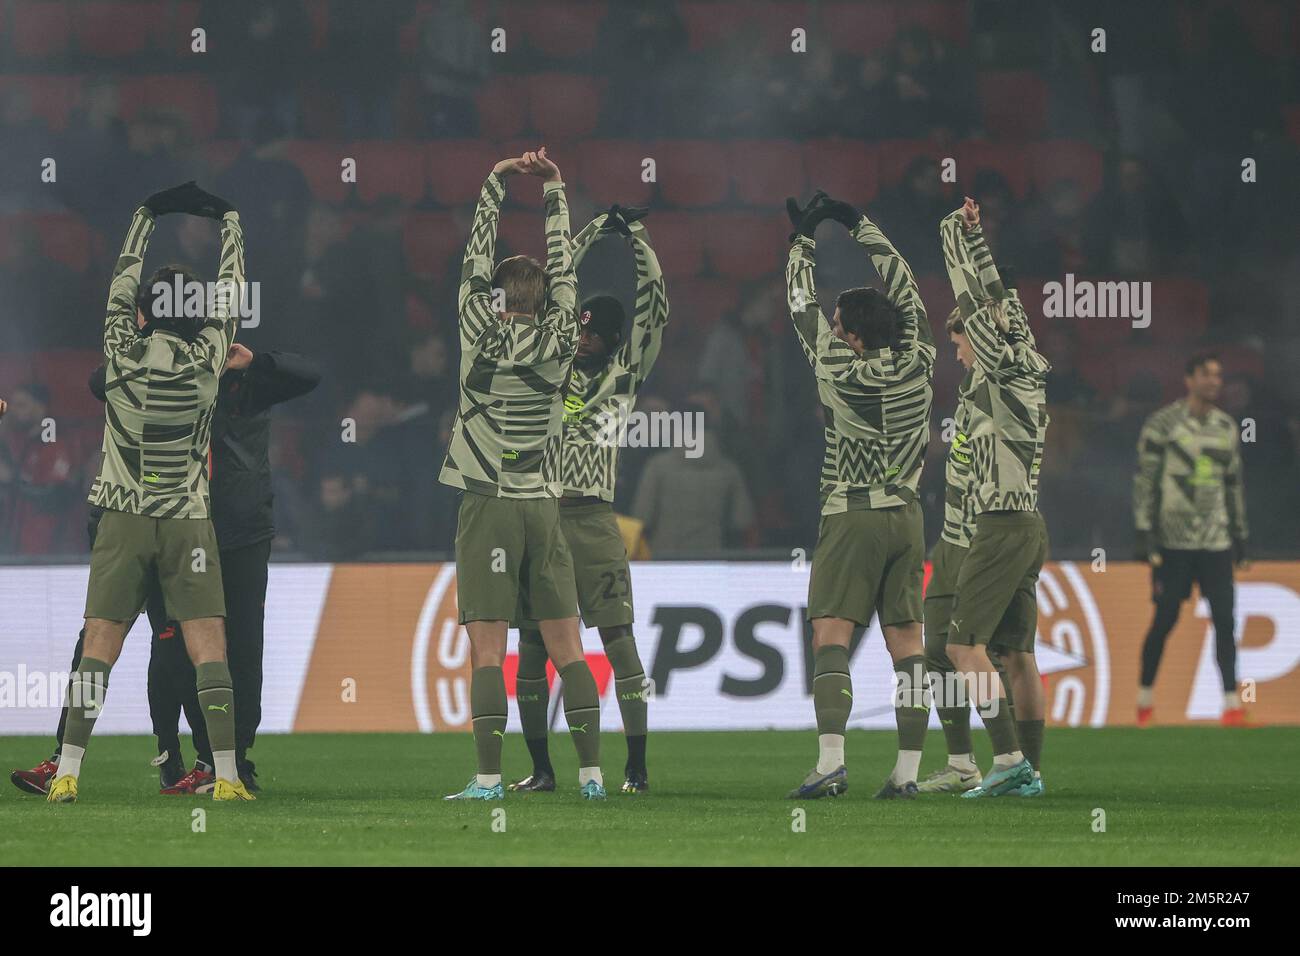 EINDHOVEN, 30-12-2022, Philips Stadium, season 2022 / 2023 friendly match,  players AC Milan during the warming up before the match PSV - Milan  (friendly) (Photo by Pro Shots/Sipa USA) Credit: Sipa US/Alamy